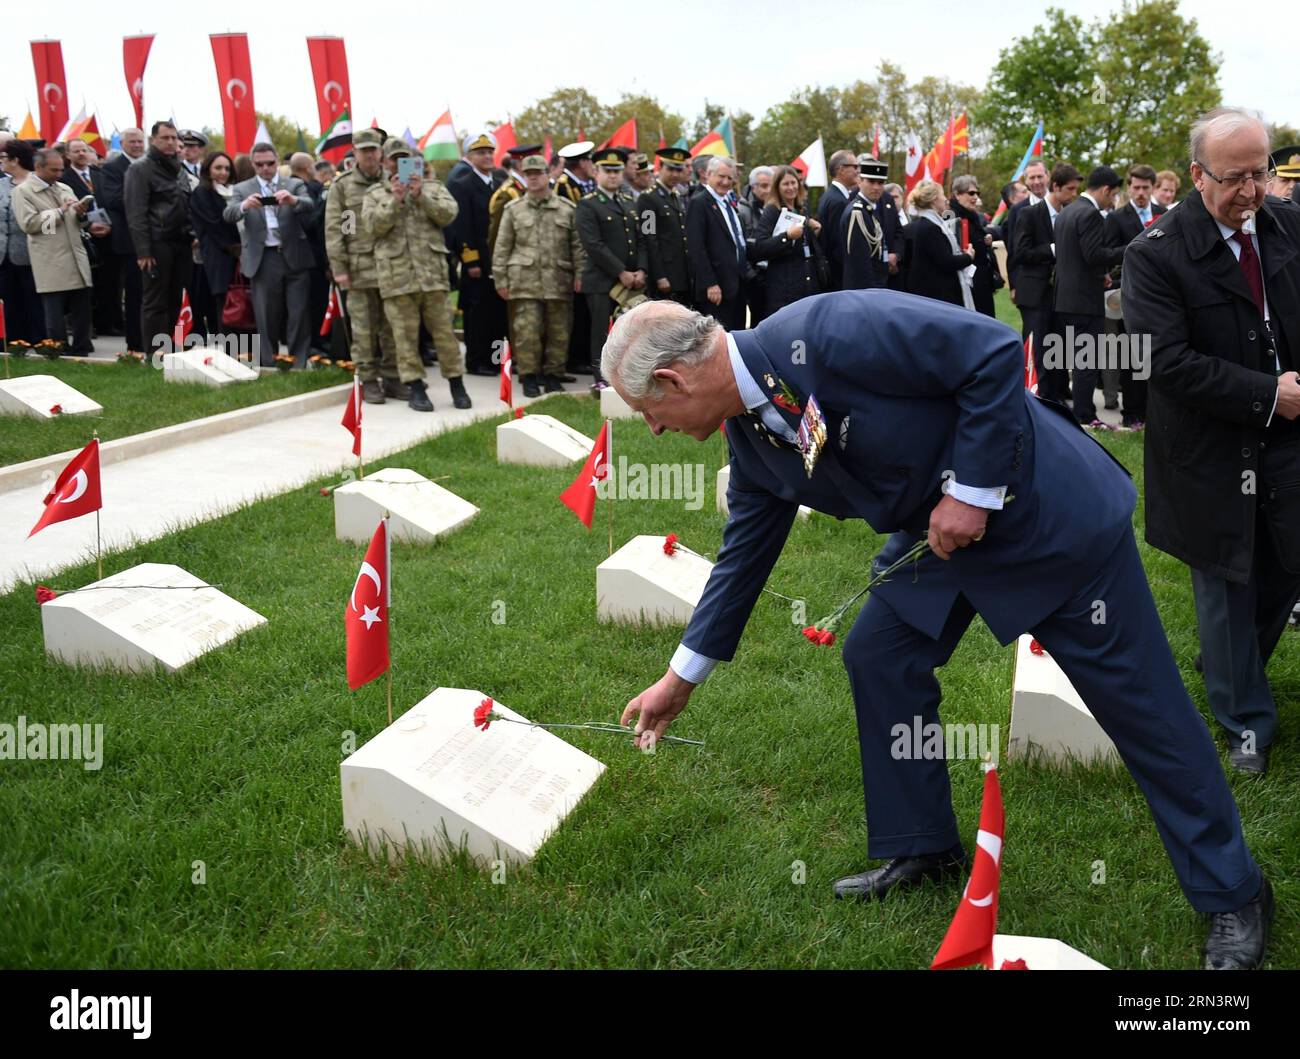 British Prince of Wales Charles presents a flower at the 57th Infantry Regiment Memorial in Canakkale, Turkey, April 25, 2015. Leaders and dignitaries from the UK, Ireland, Australia and New Zealand joined Turkish military delegates to attend Turkish memorial service on Saturday at the 57th Infantry Regiment Memorial, as an event of 100th anniversary of the Gallipoli Battle. ) TURKEY-CANAKKALE-TURKISH MEMORIAL SERVICE HexCanling PUBLICATIONxNOTxINxCHN   British Prince of Wales Charles Presents a Flower AT The 57th Infantry Regiment Memorial in Canakkale Turkey April 25 2015 Leaders and dignita Stock Photo